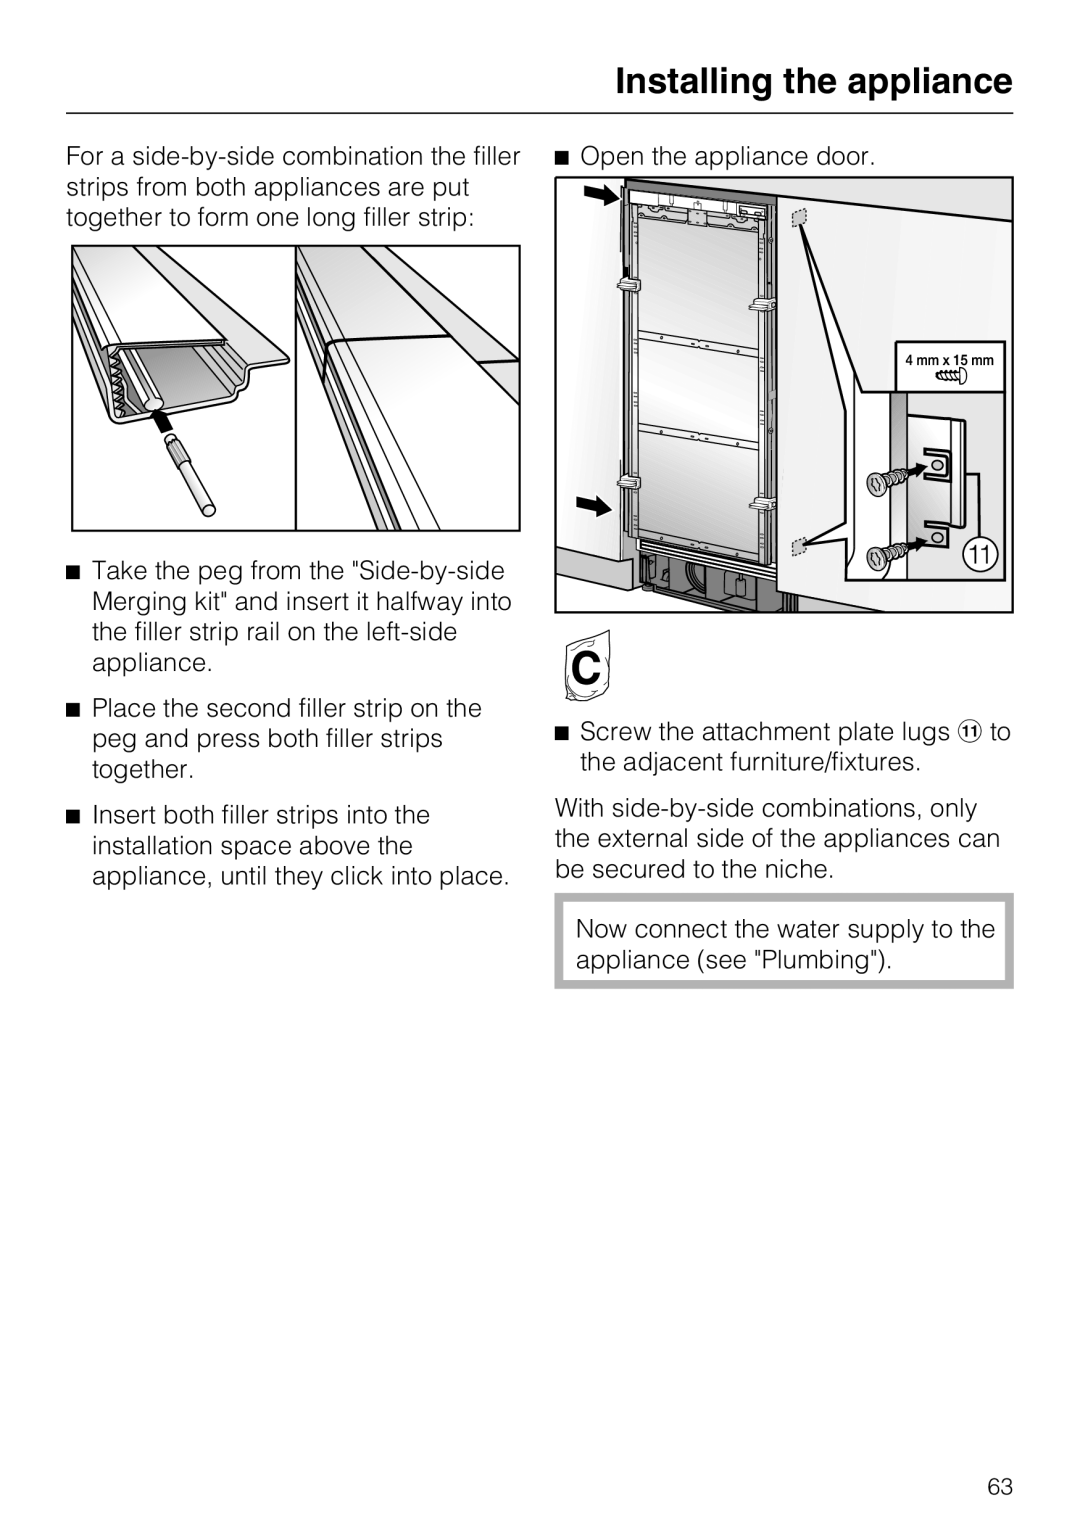 Miele F 1411 Vi installation instructions Installing the appliance, Open the appliance door 